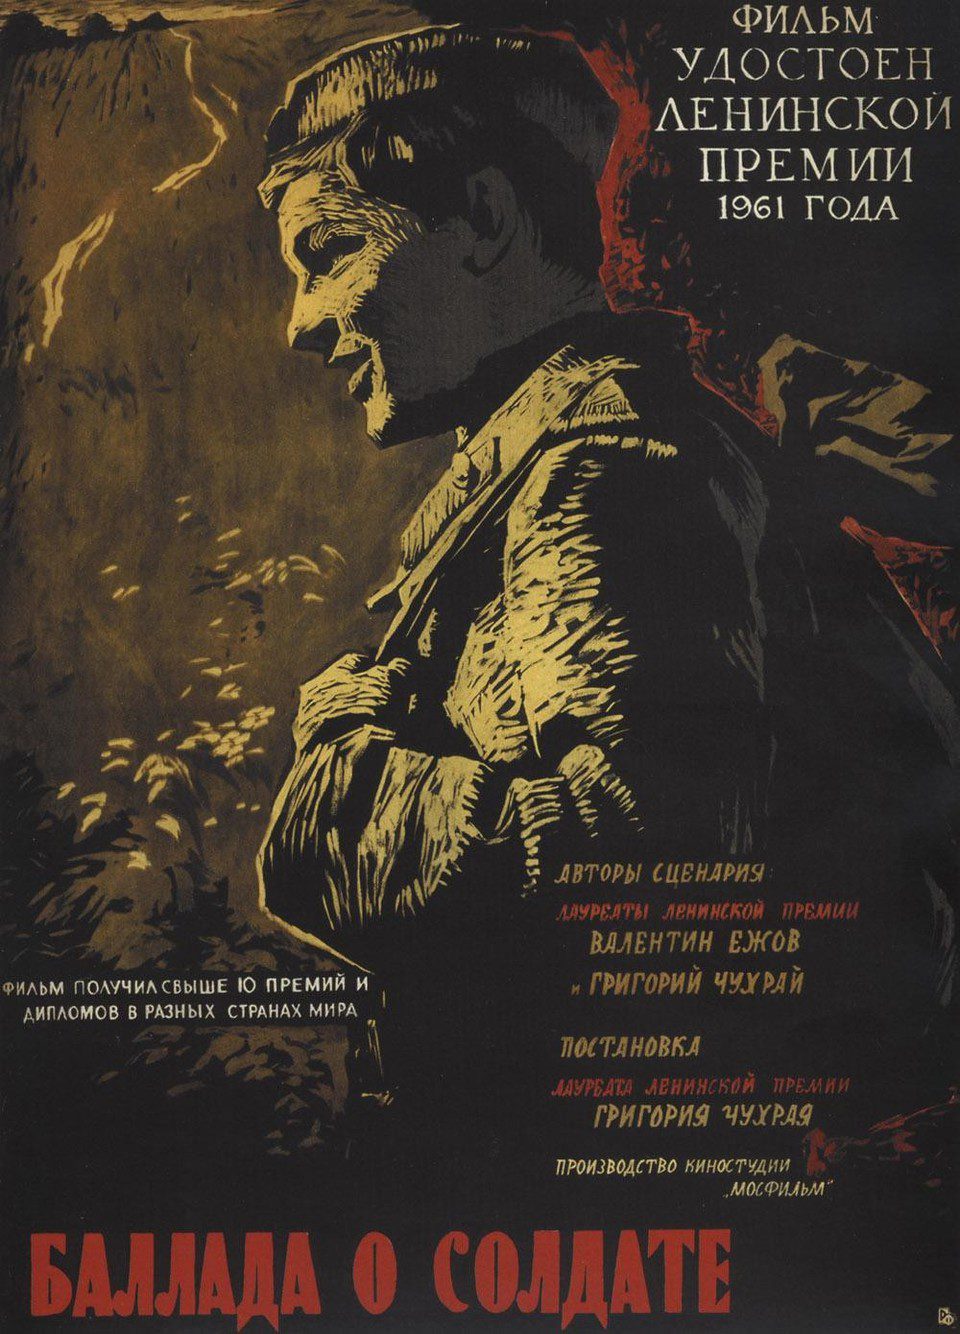 Poster of Ballad of a Soldier - Rusia